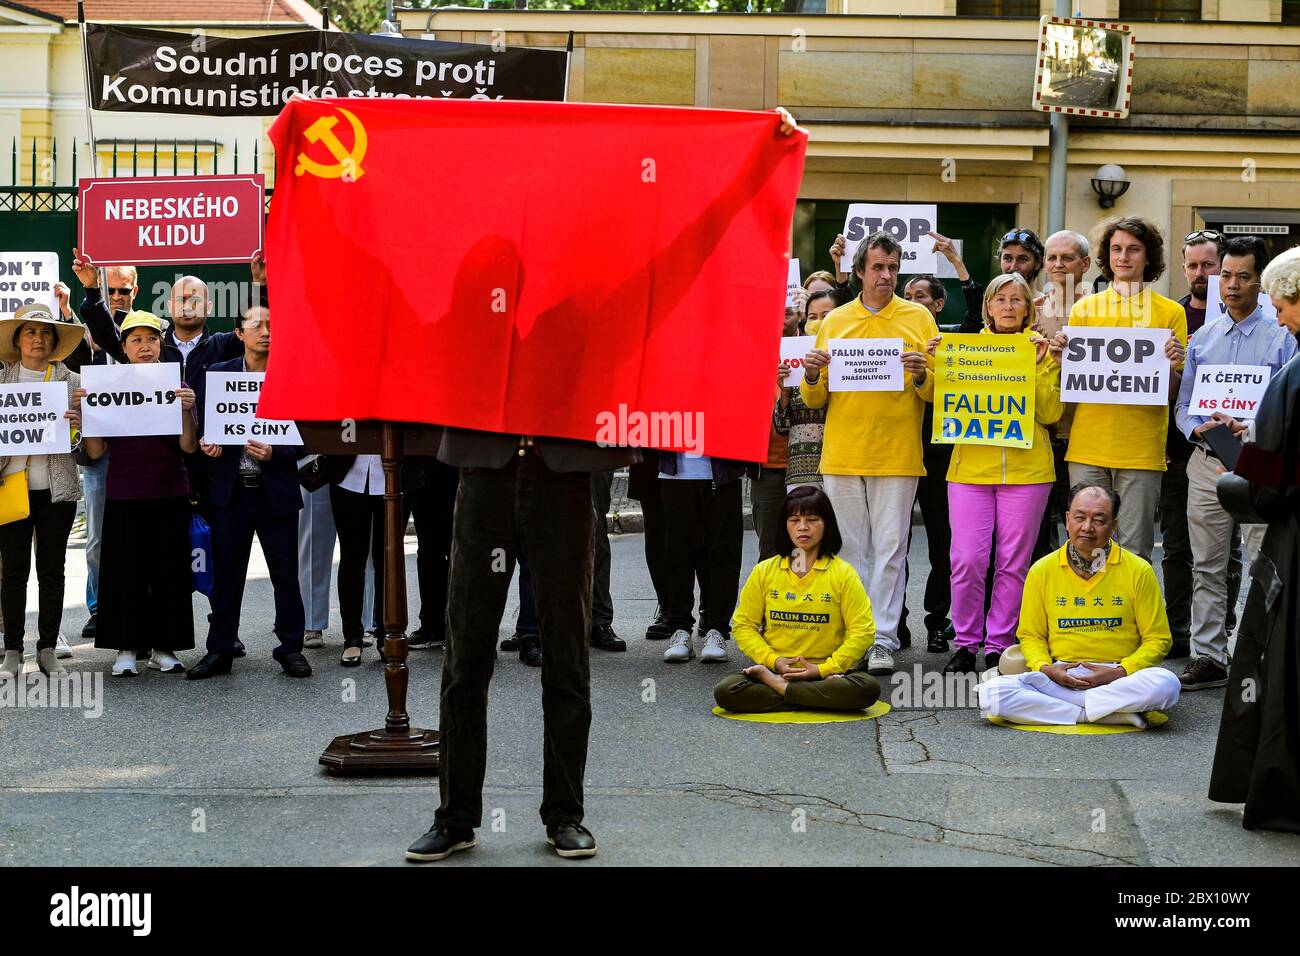 Performance to stage 'Trial of Communist Party of China' on the occasion of 31st anniversary of Tiananmen Square massacre, in which Chinese soldiers killed more than 1000 demonstrating students in June 1989, was held outside Embassy of China in Prague, Czech Republic, on June 4, 2020. (CTk Photo/Roman Vondrous) Stock Photo